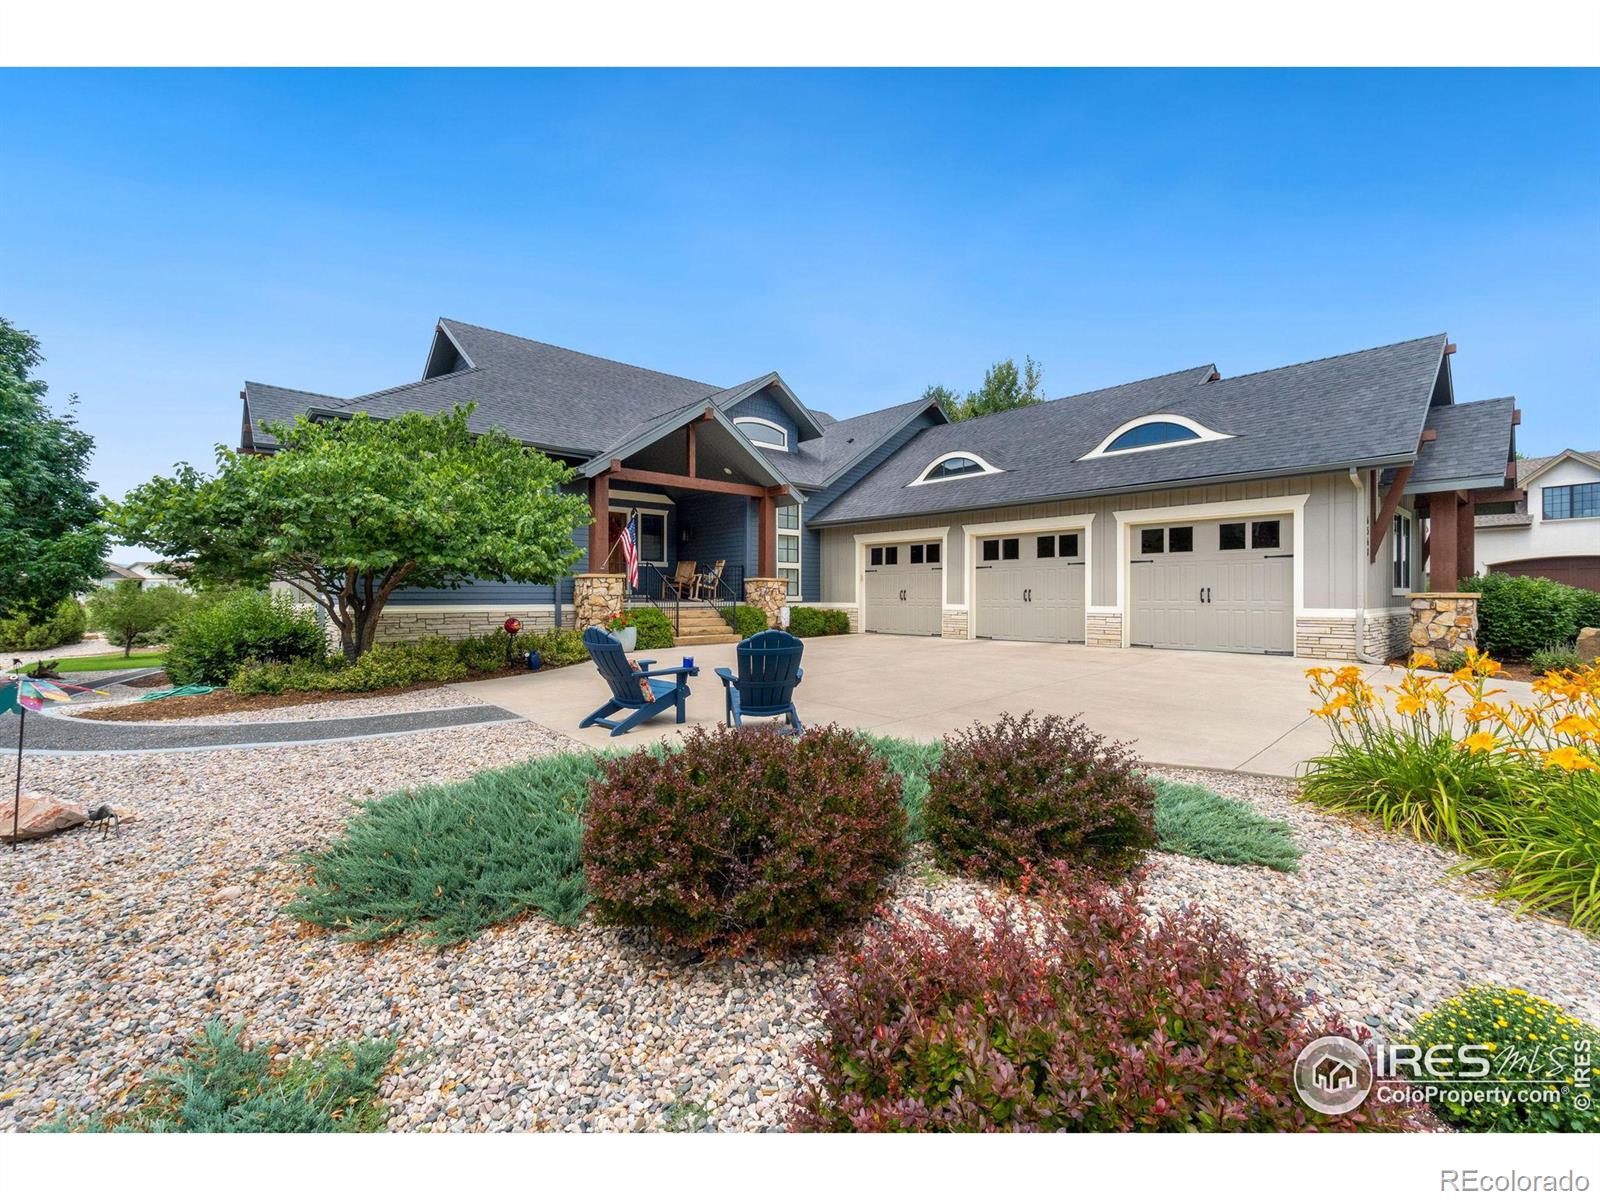 6568  Rookery Road, fort collins MLS: 4567891006306 Beds: 5 Baths: 6 Price: $2,200,000